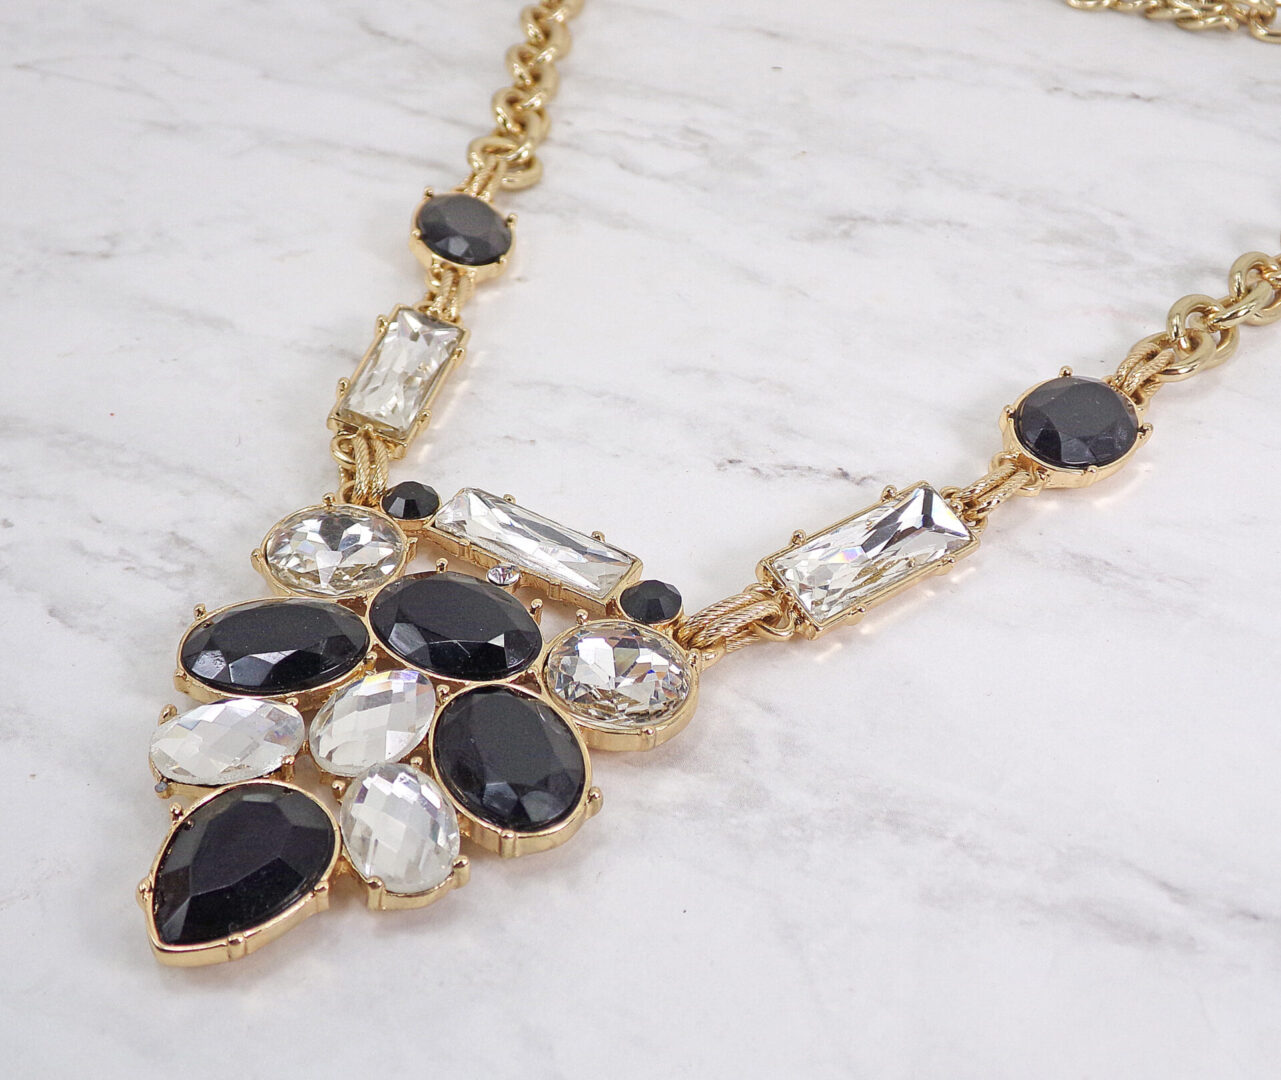 BLACK & CLEAR CRYSTAL STATEMENT NECKLACE - Calisa Designs